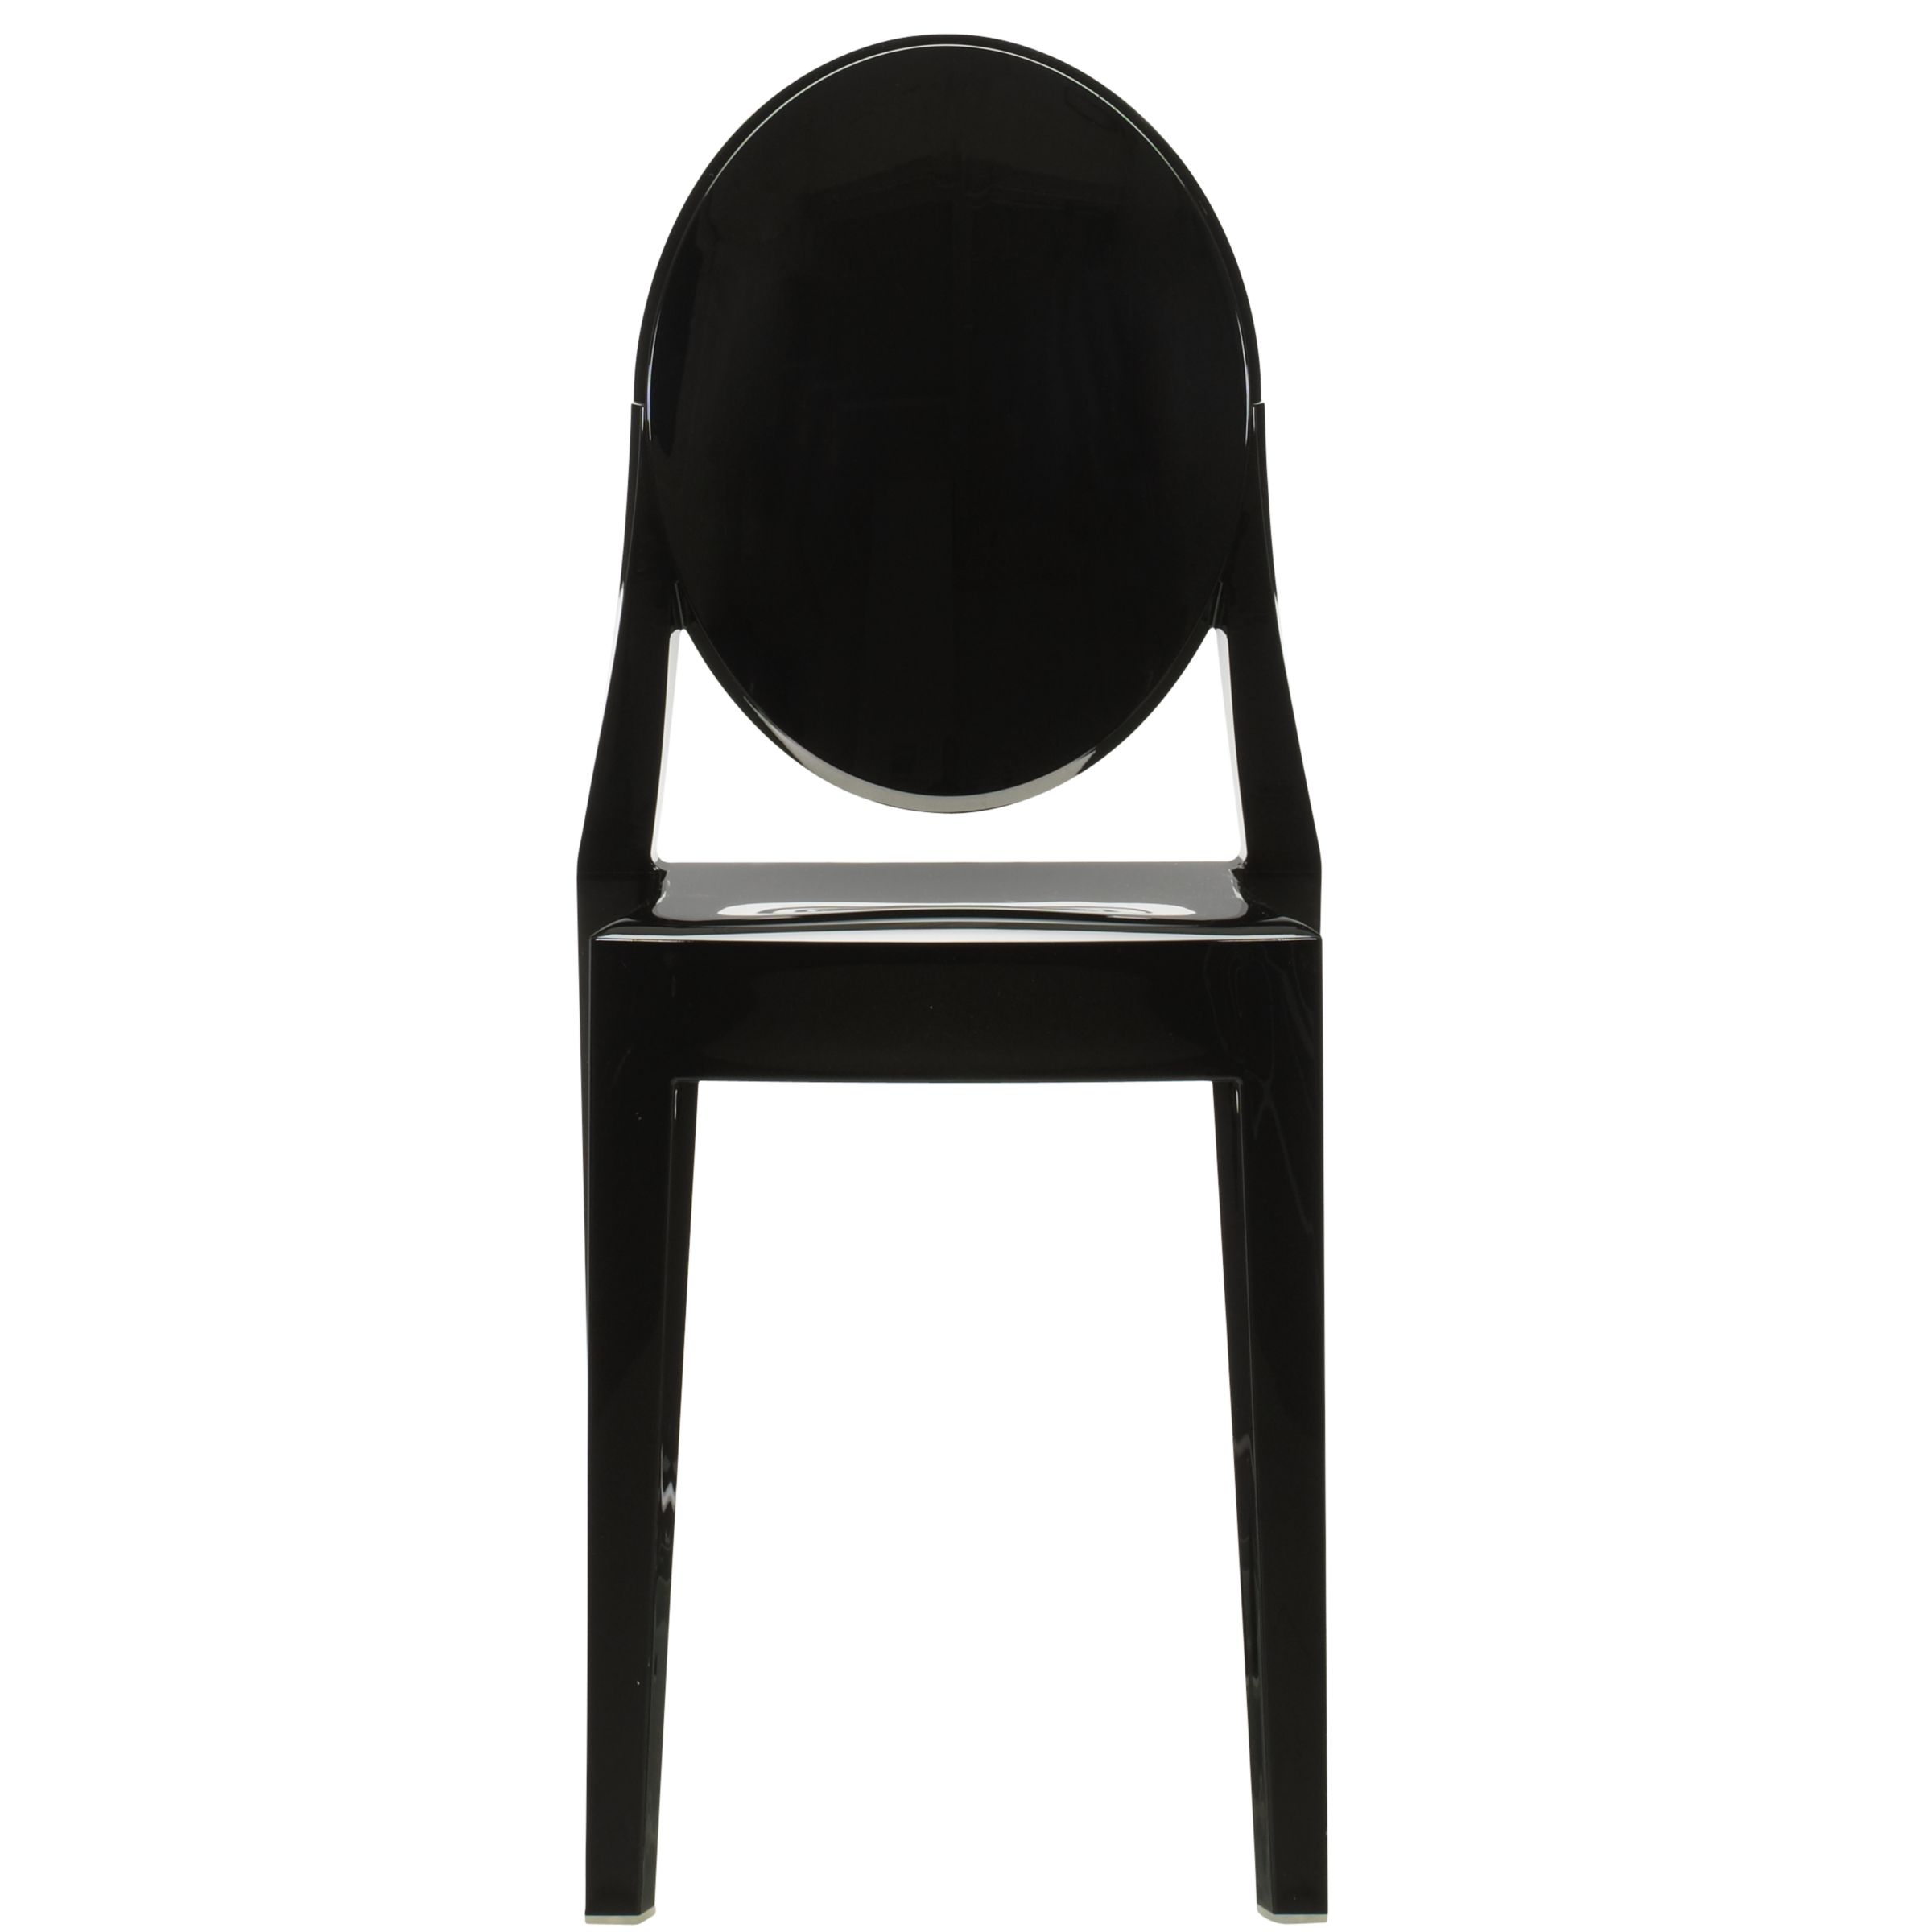 Philippe Starck for Kartell Victoria Ghost Chair, Black at John Lewis